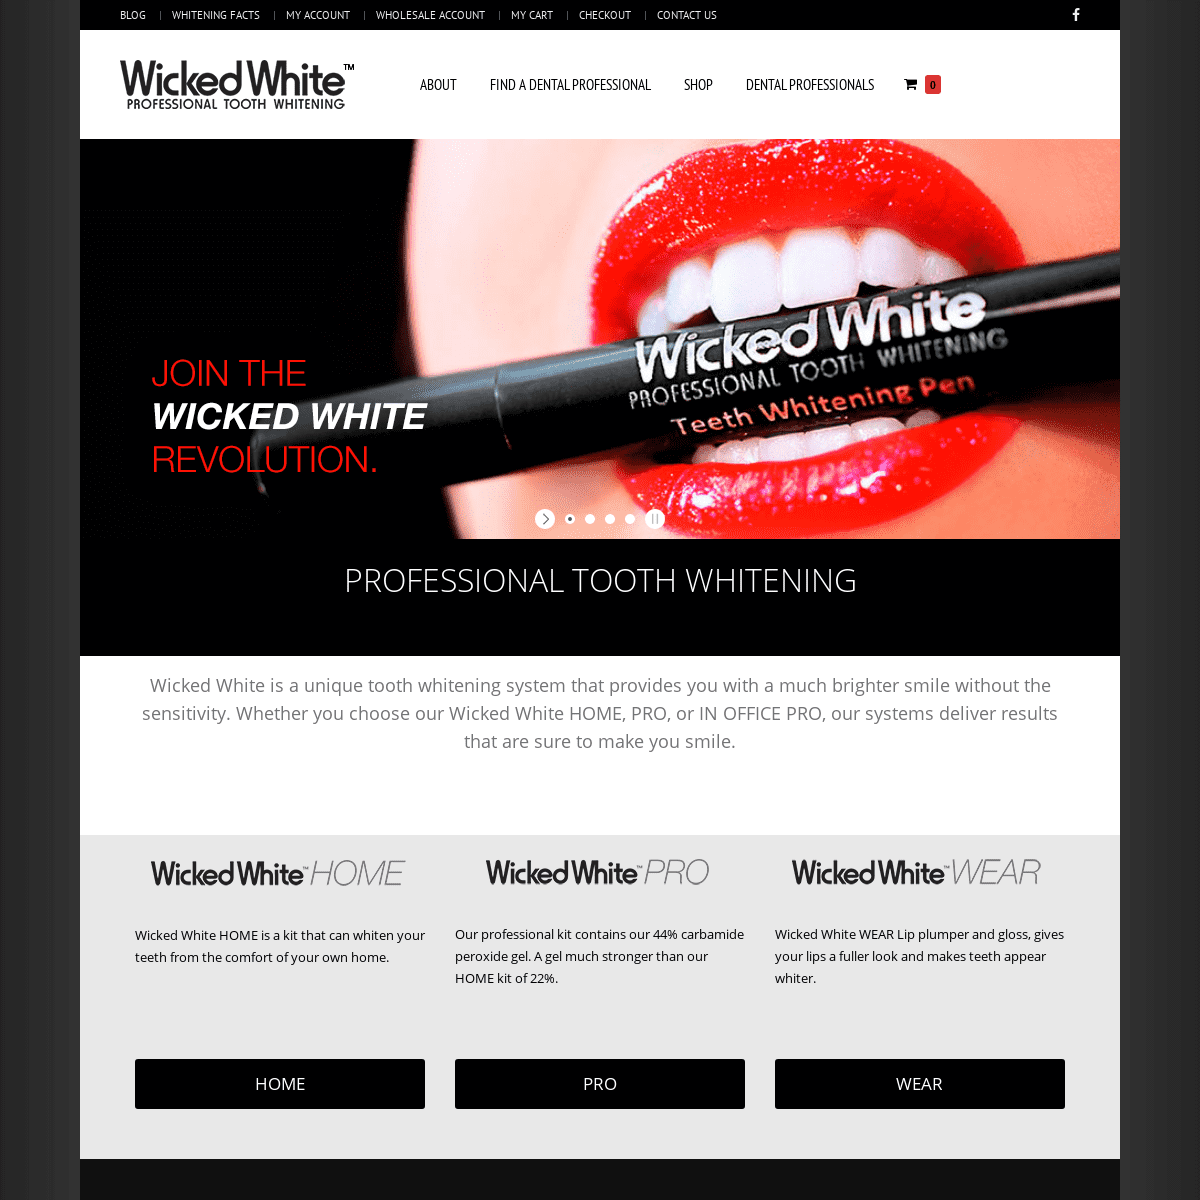 A complete backup of wickedwhite.com